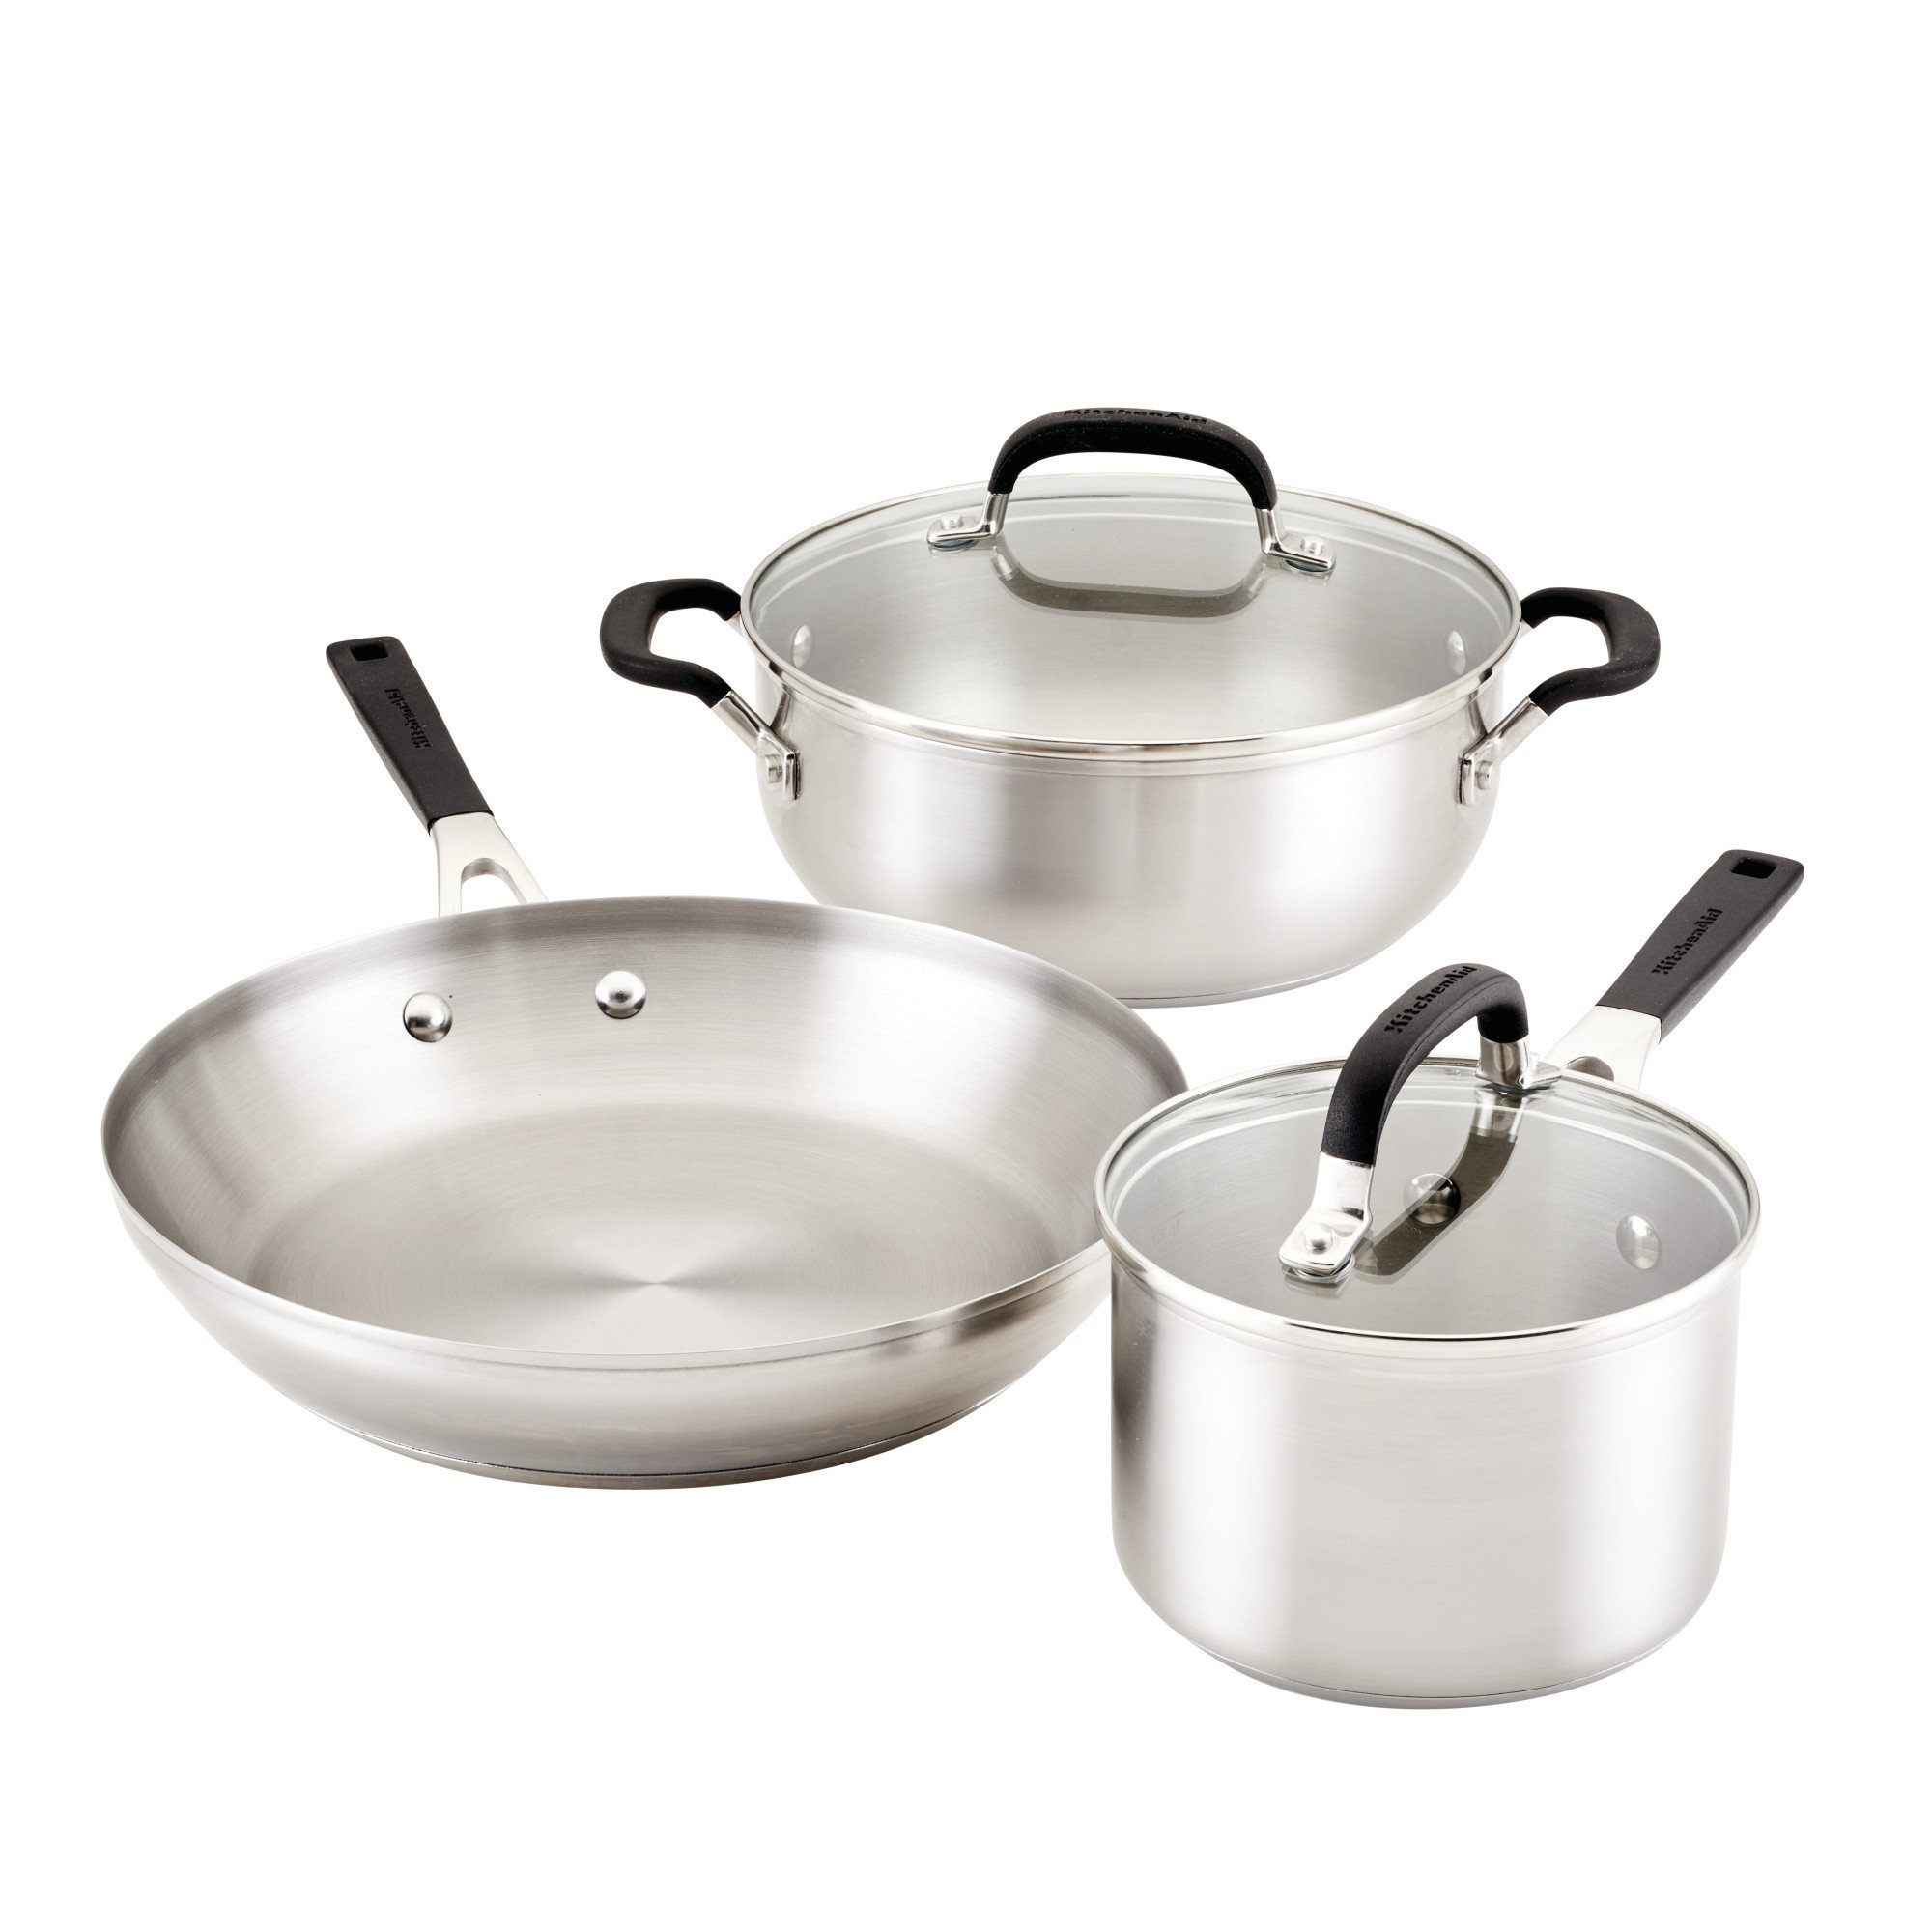 Stainless Steel Cookware Pots and Pans Set, 5 Piece, Brushed Stainless Steel